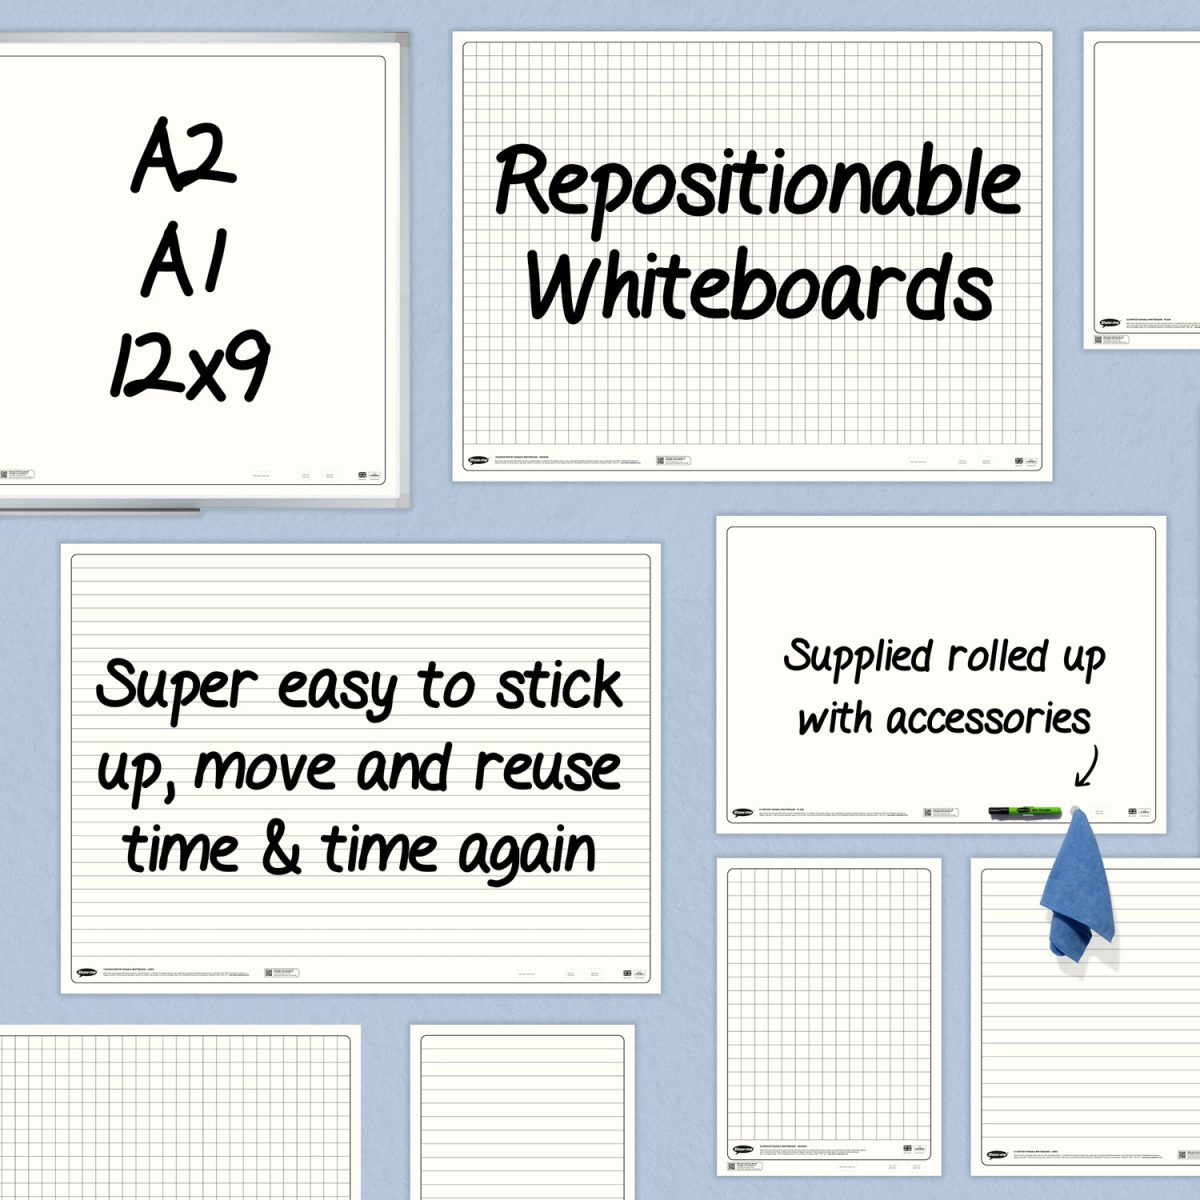 Repositionable Whiteboards